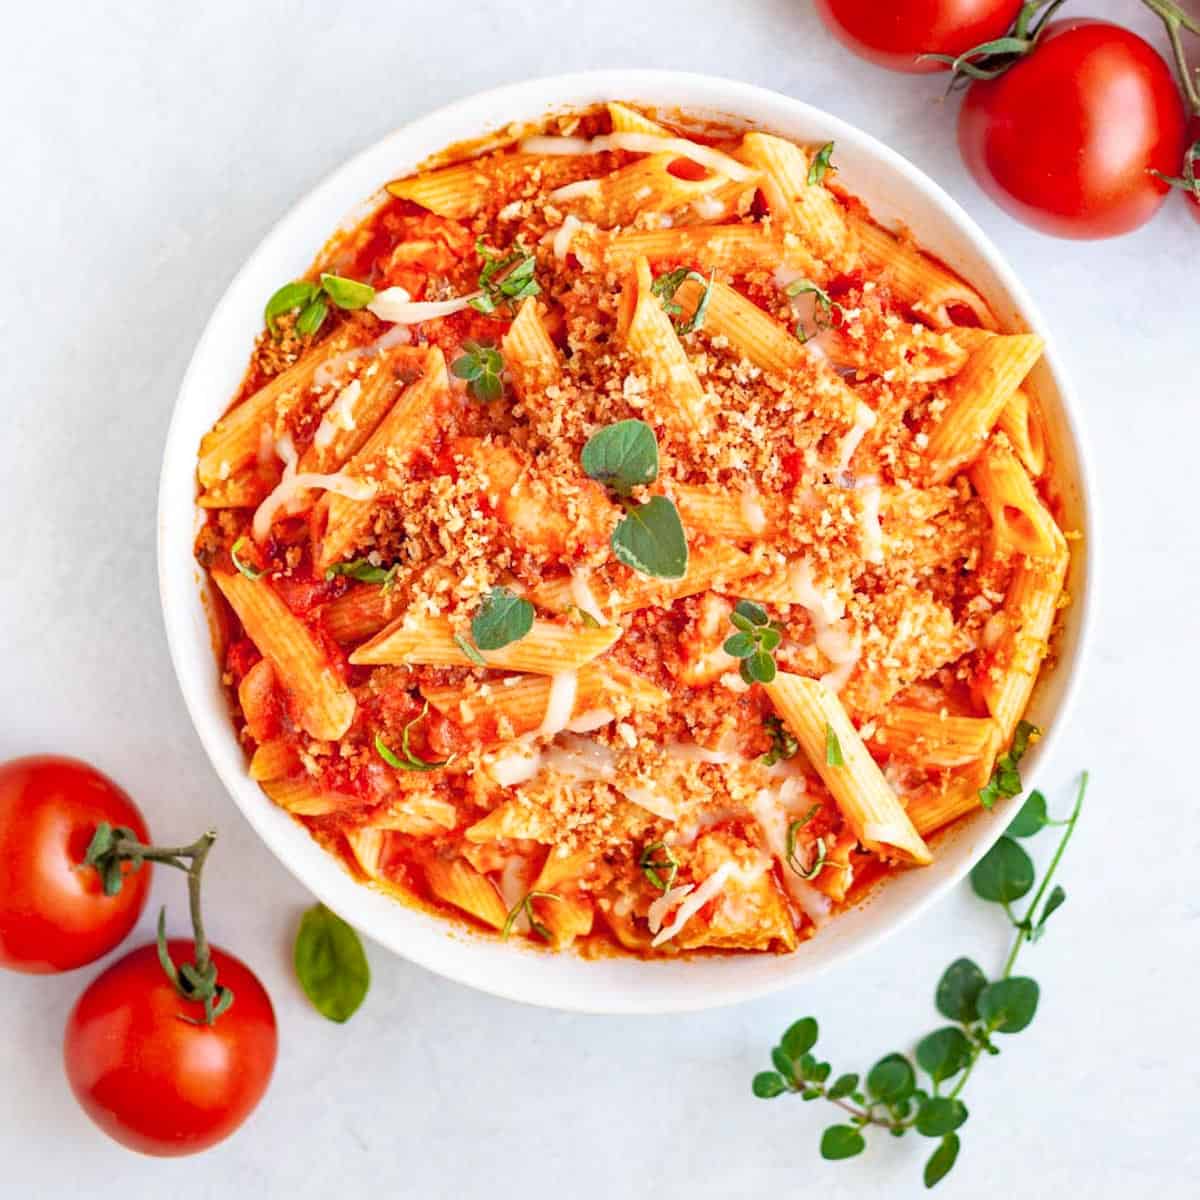 A bowl of pasta with tomatoes and herbs.